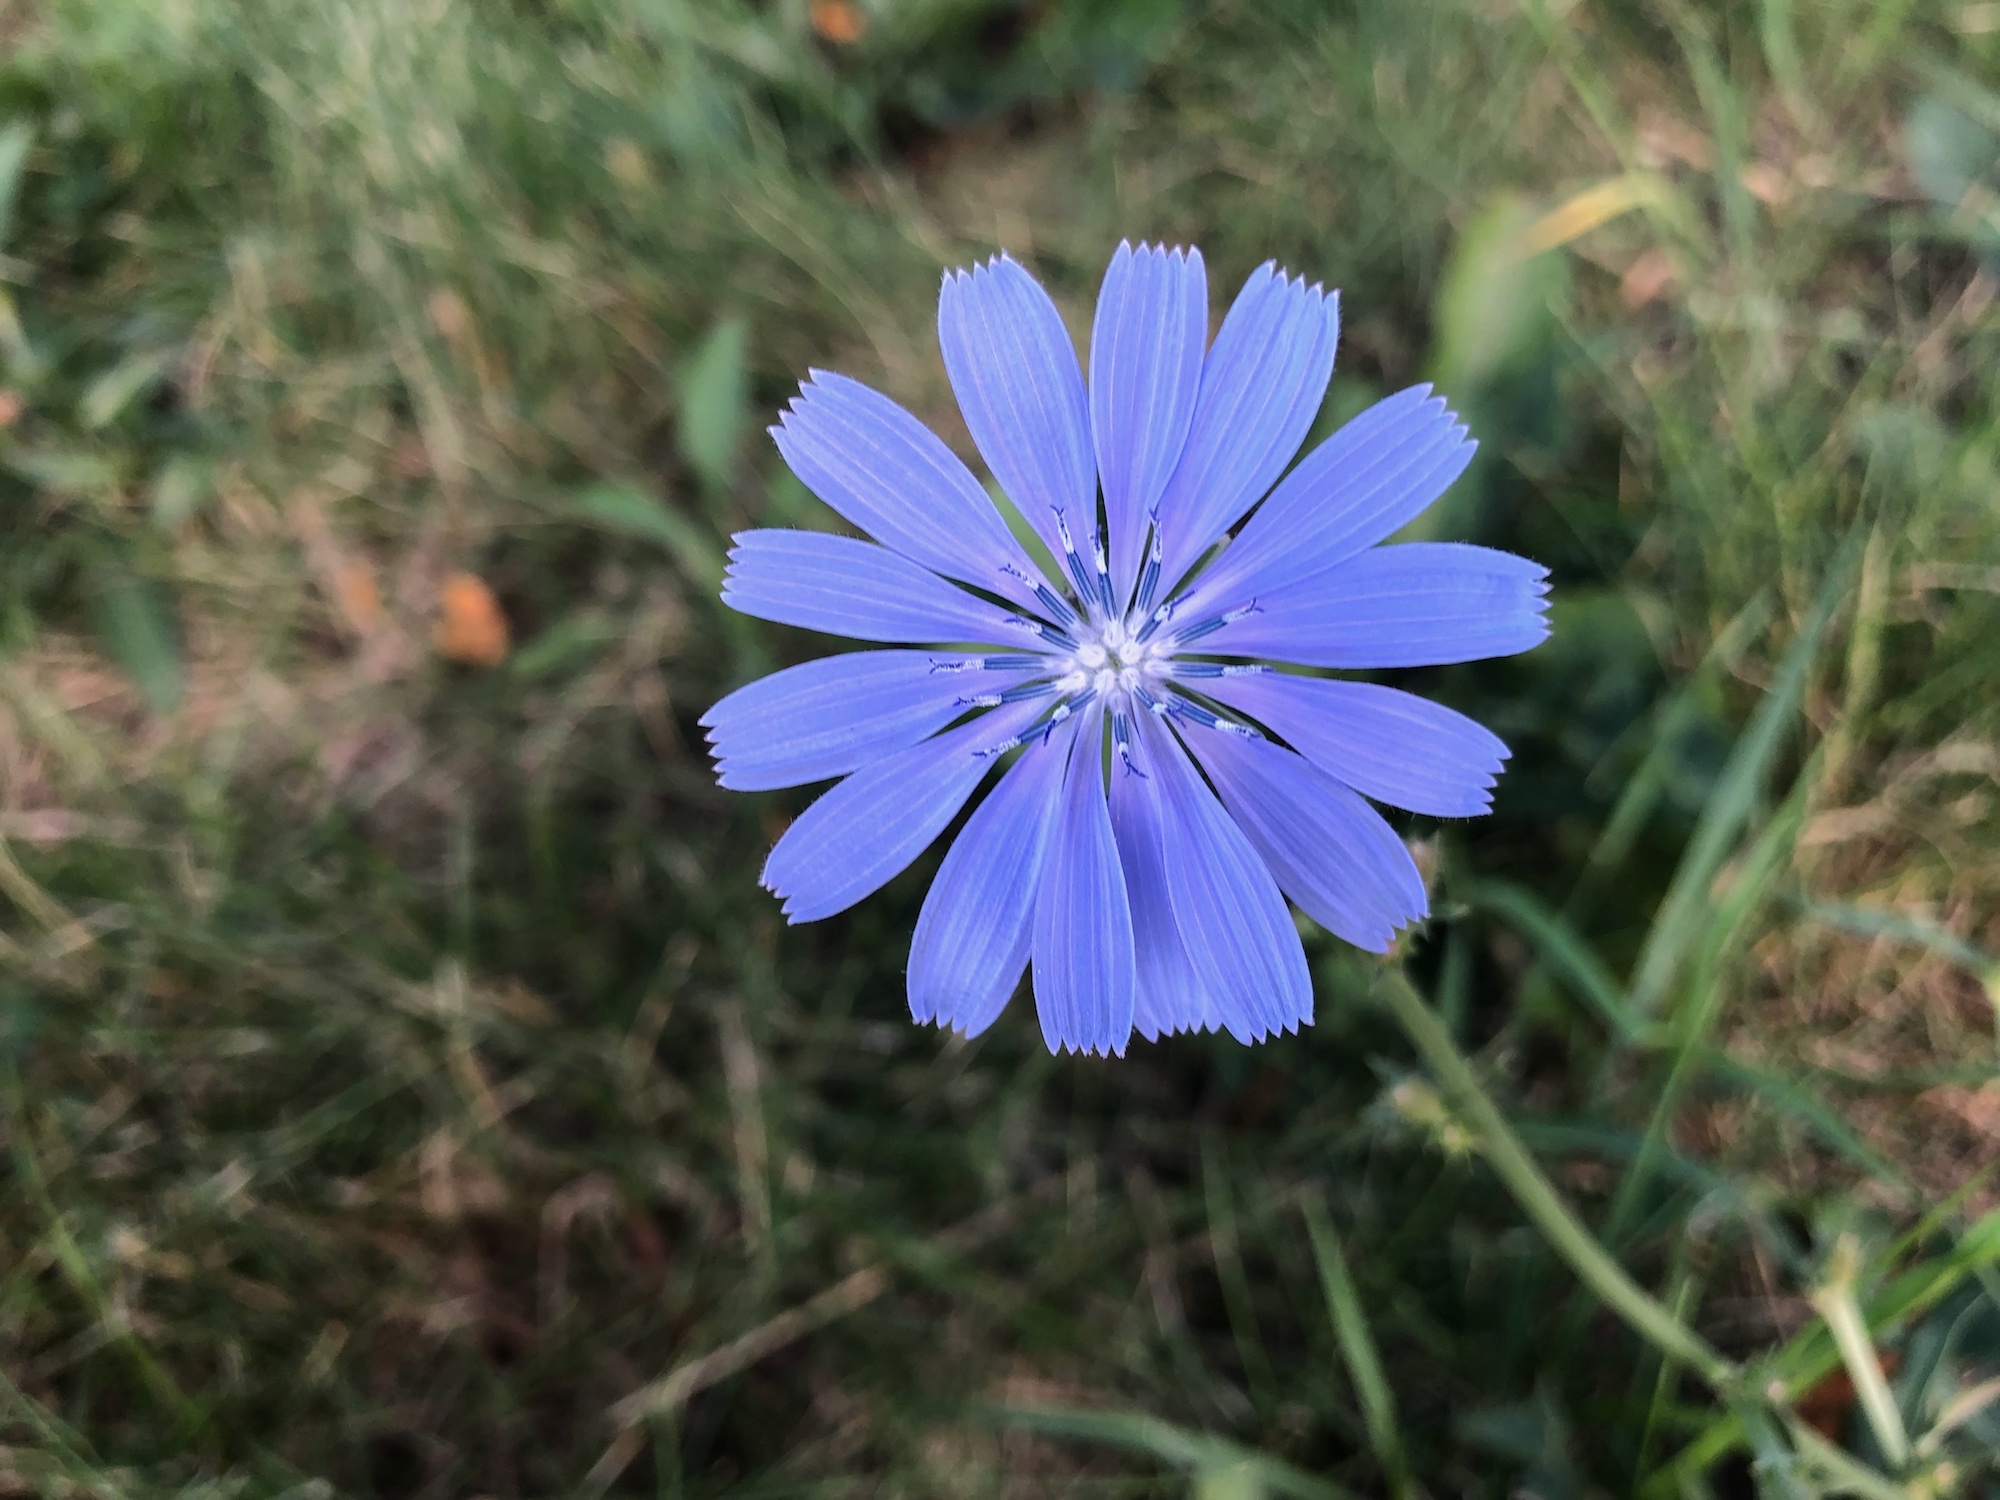 Chicory in Marion Dunn Prairie in Madison, Wisconsin on August 3, 2019.